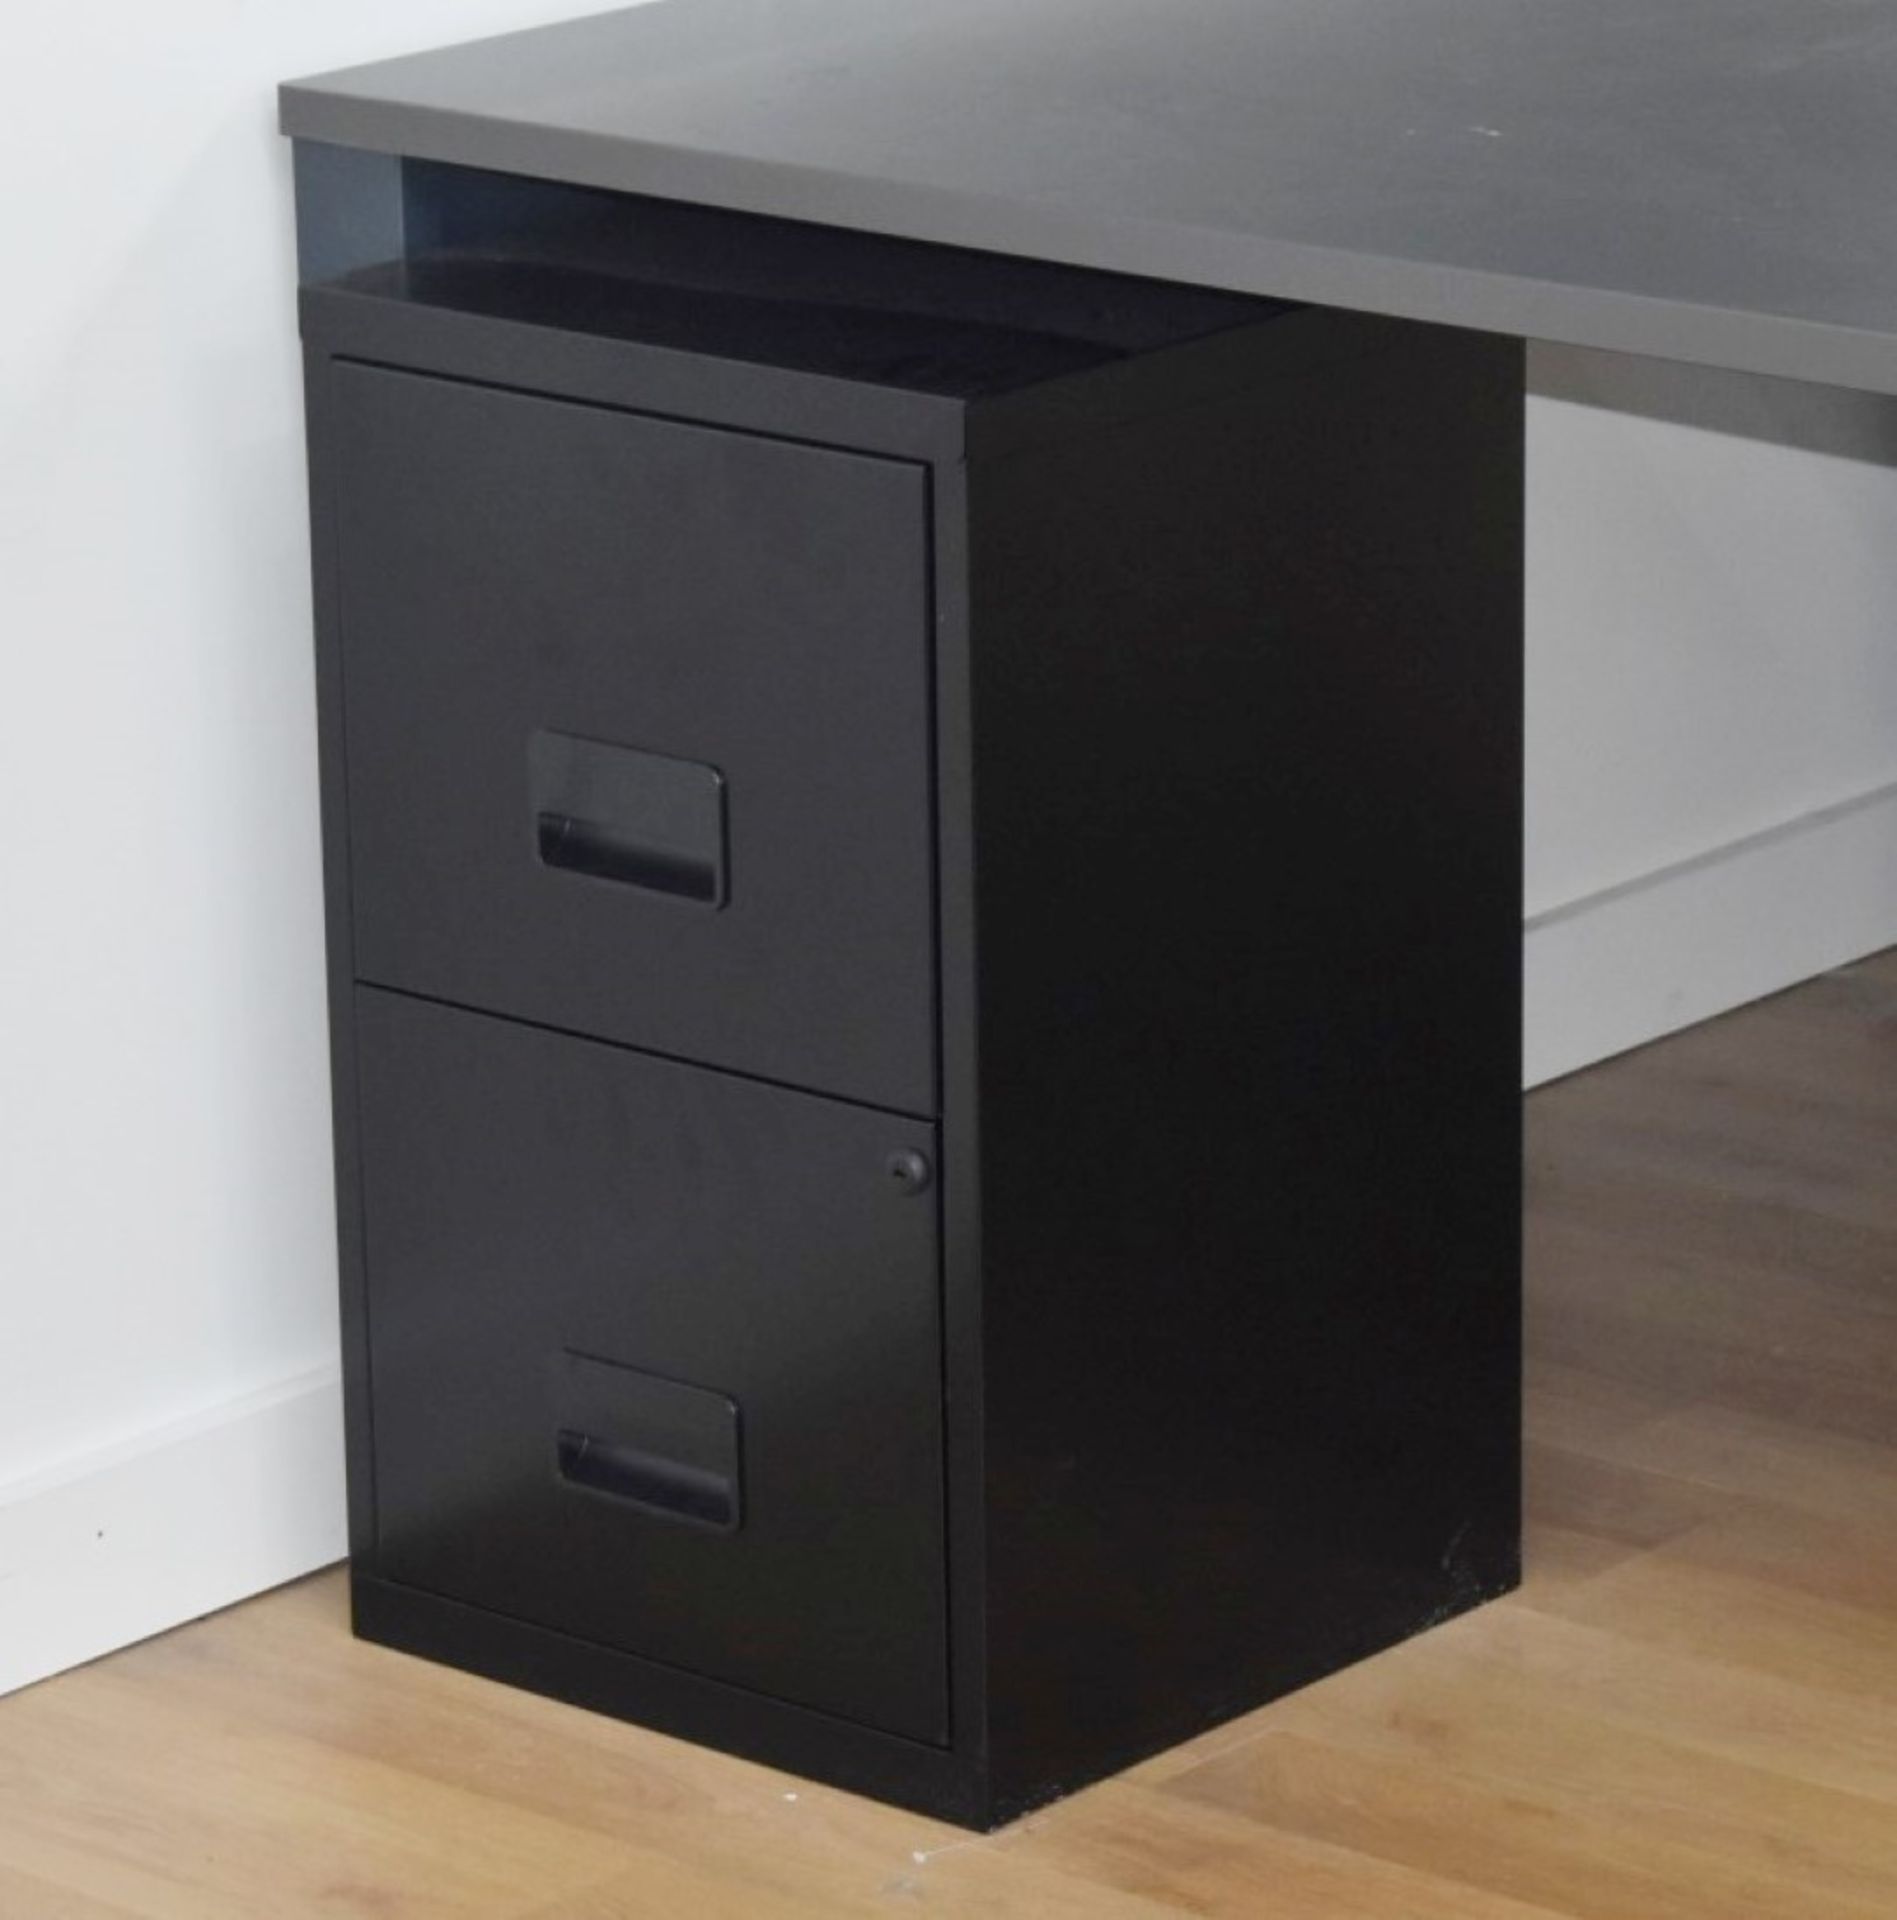 2 x Office Filing Cabinets With Two Drawers & Keys - Black Metal Finish Suitable For Modern Offices - Image 4 of 6